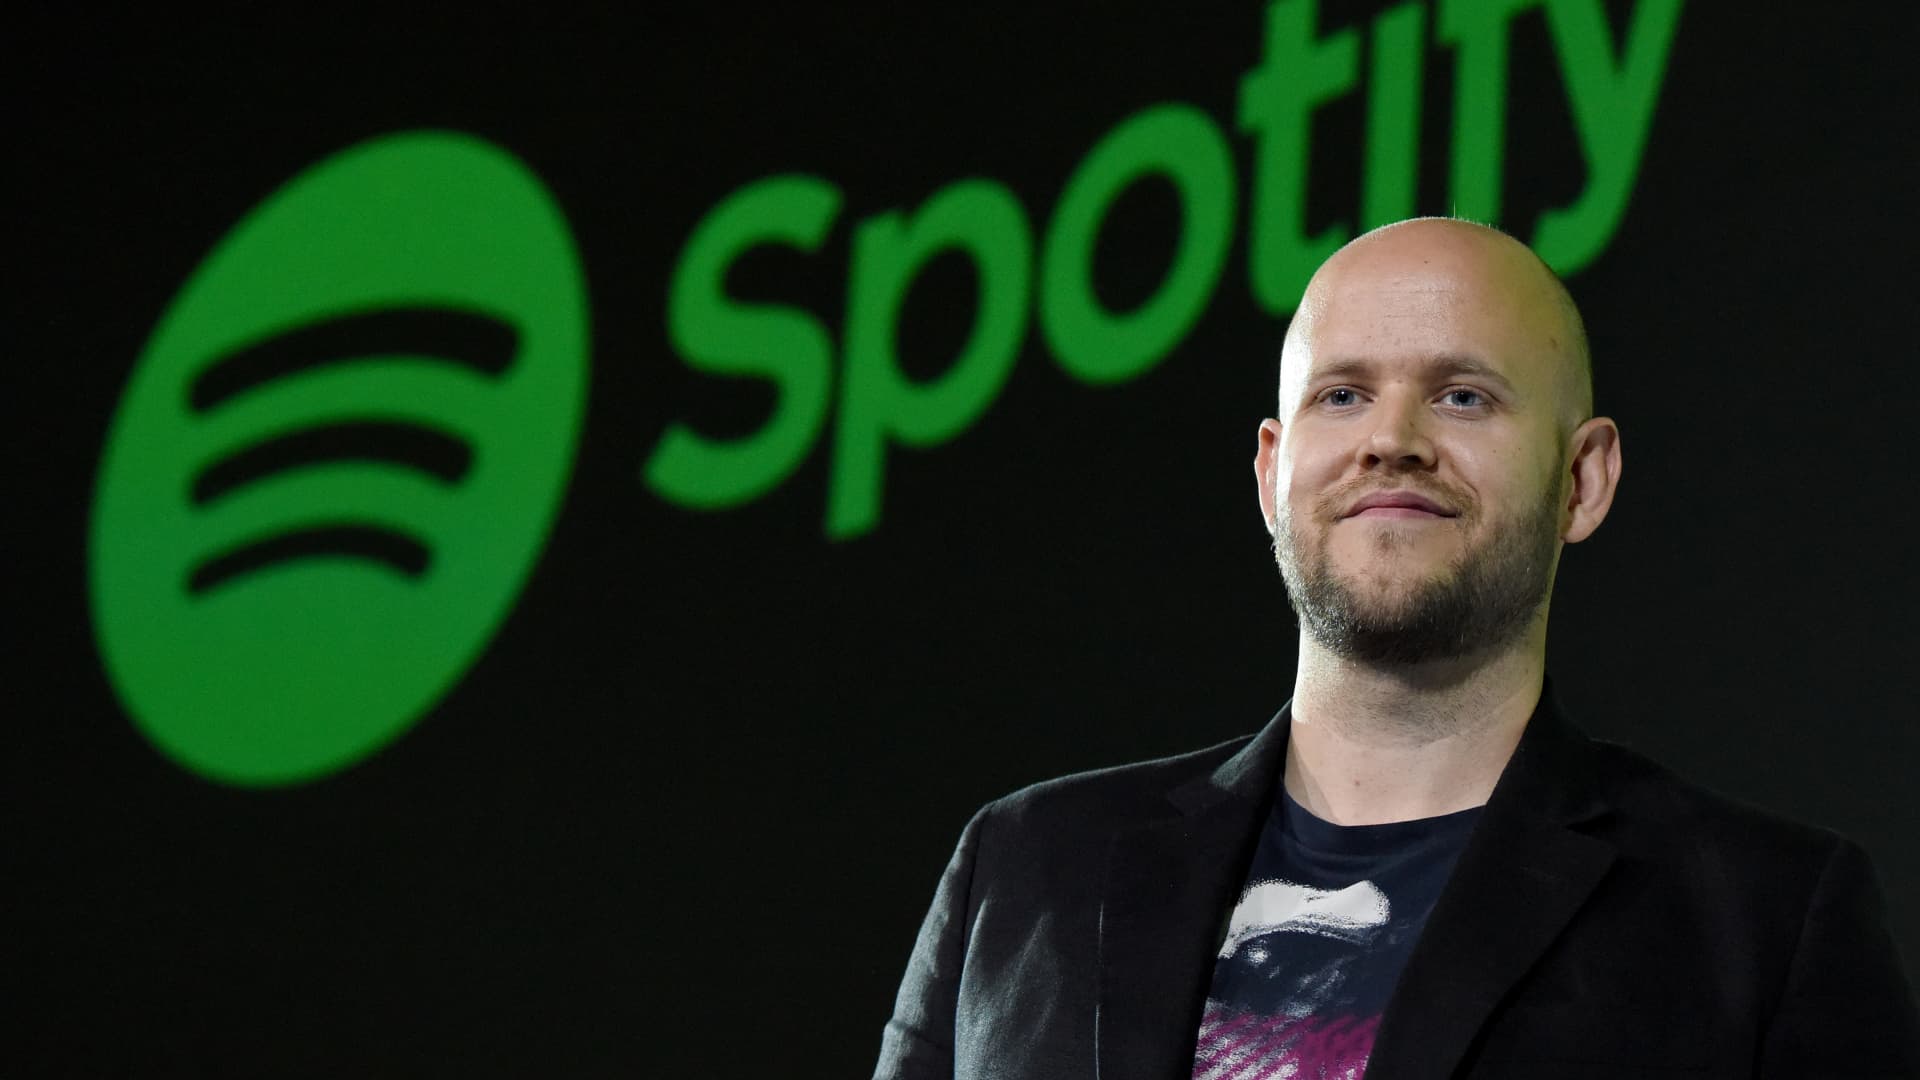 Spotify to cut 6{a78e43caf781a4748142ac77894e52b42fd2247cba0219deedaee5032d61bfc9} of its workforce as tech layoffs continue